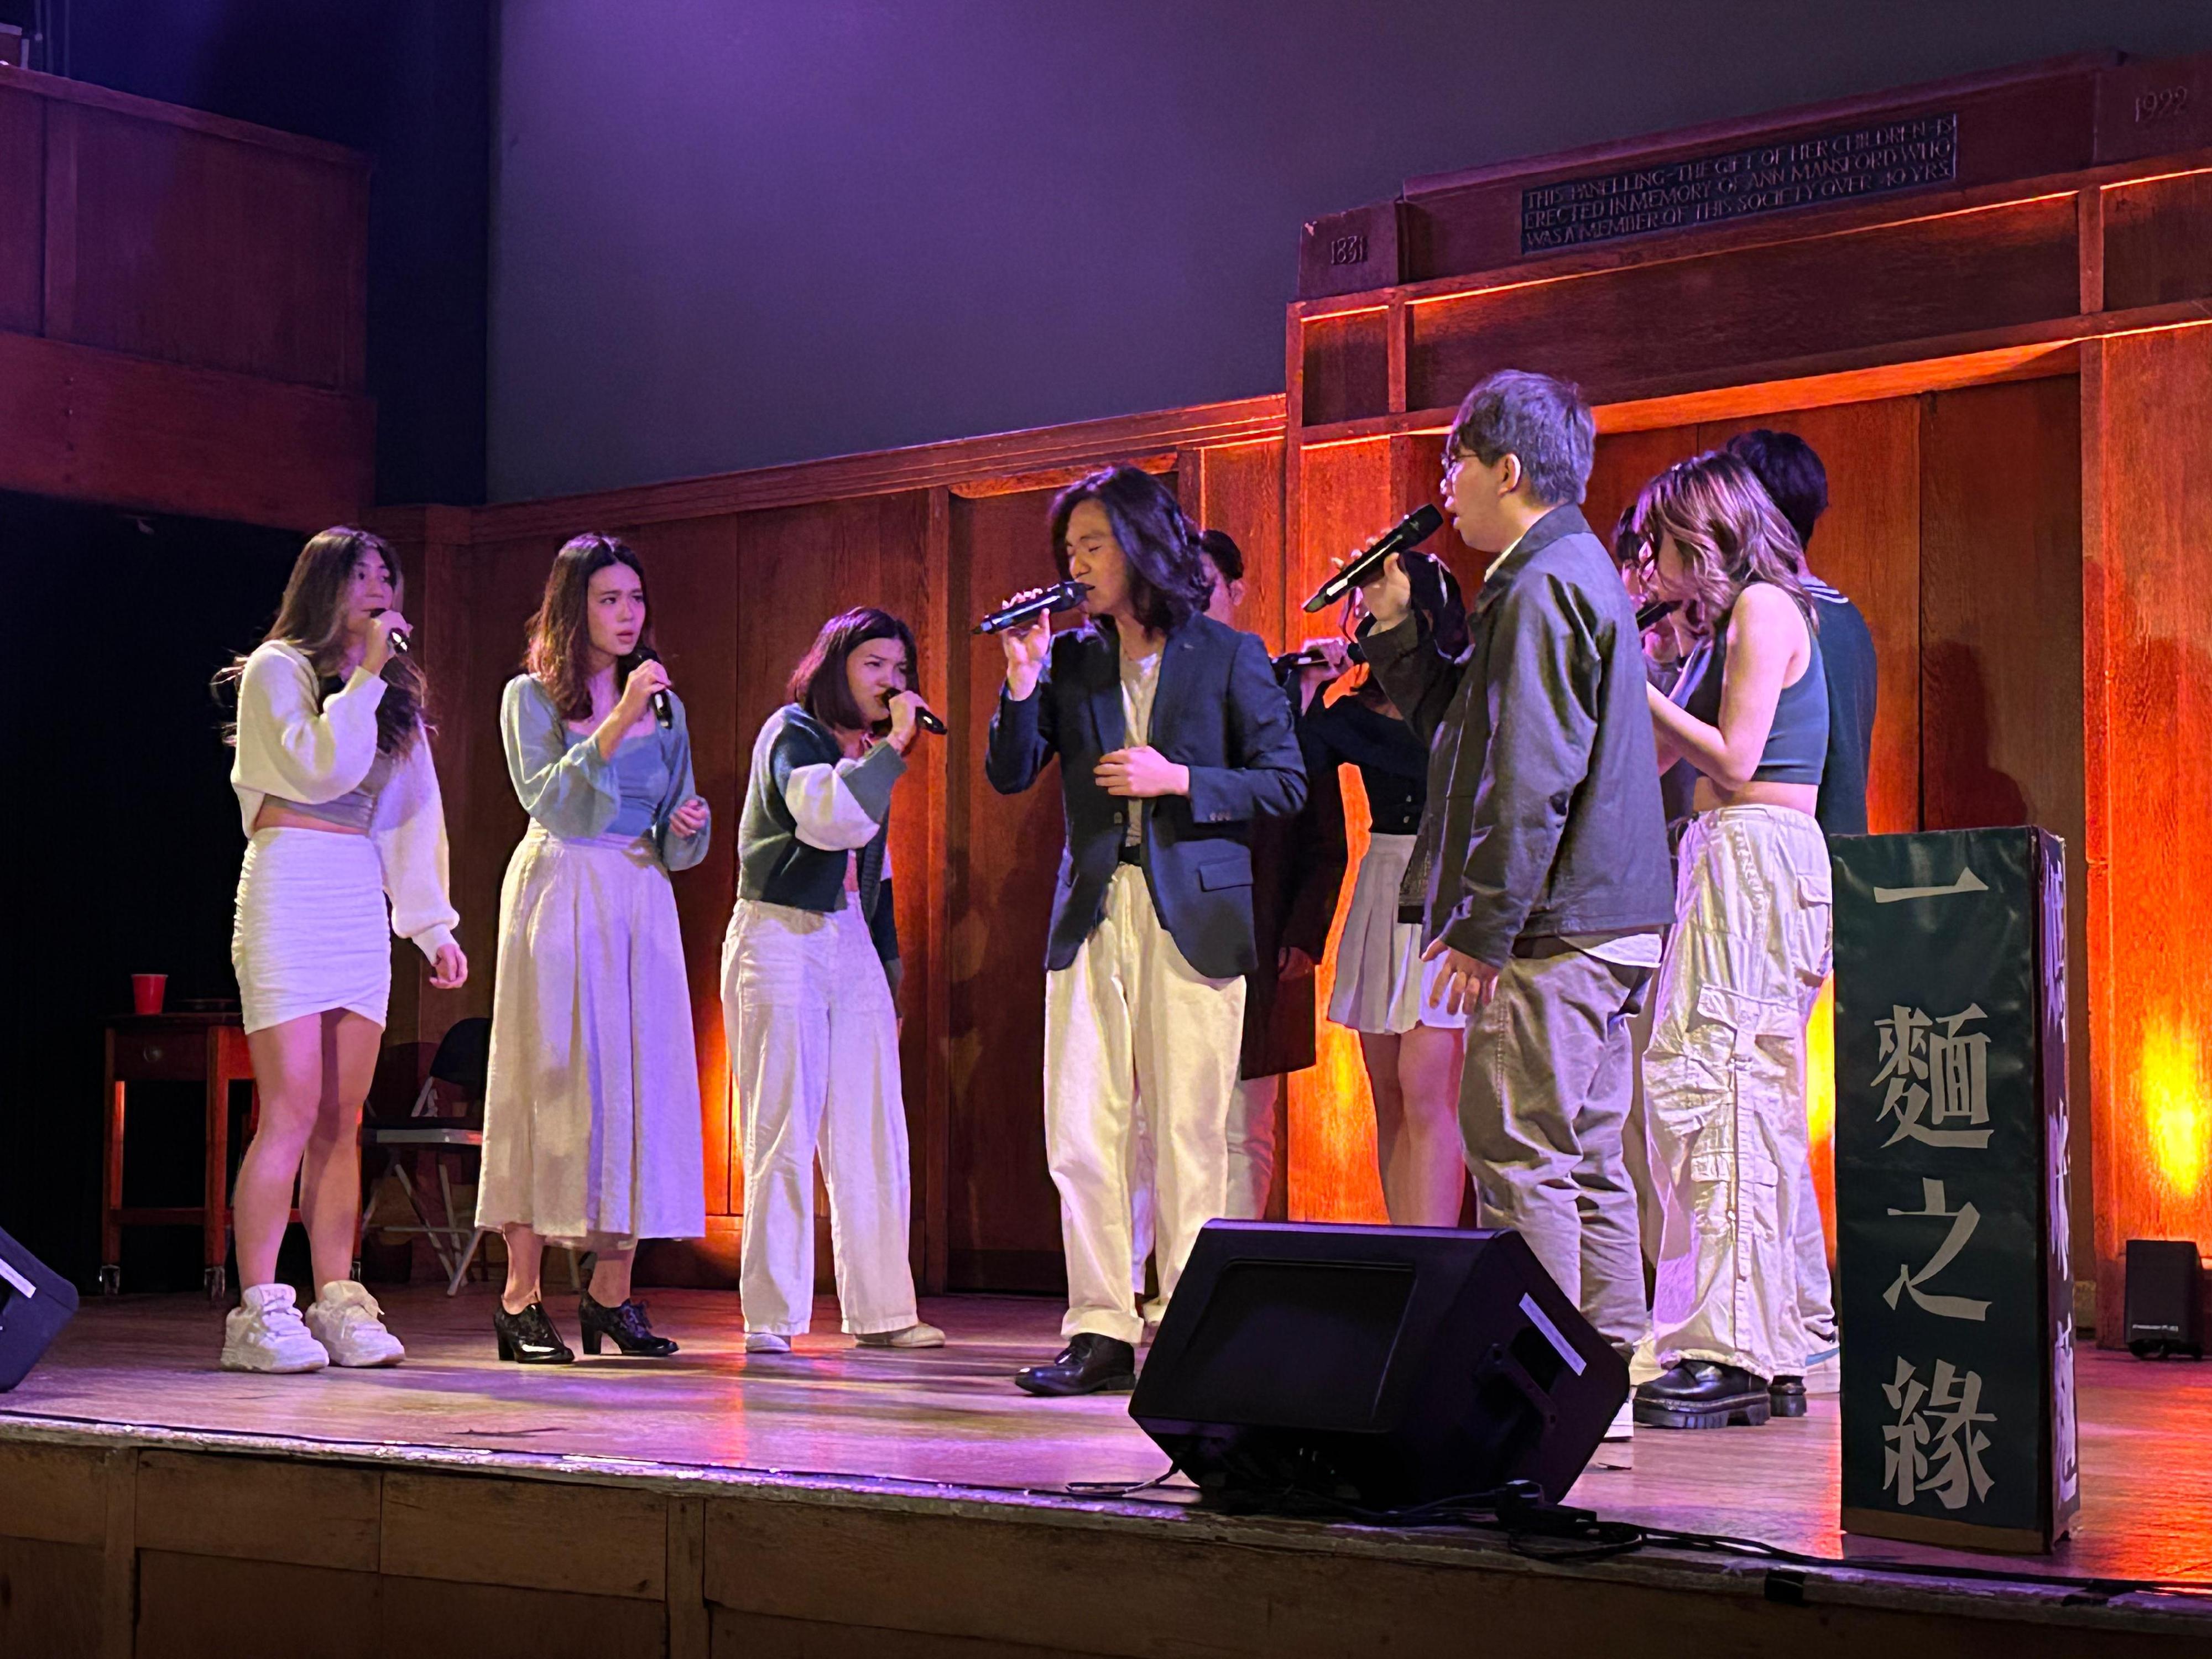 The Hong Kong Economic and Trade Office, London supported an a cappella concert of The Mockingbird at Conway Hall in London. Photo shows the group showcasing their music talent at the concert on March 27 (London time).

